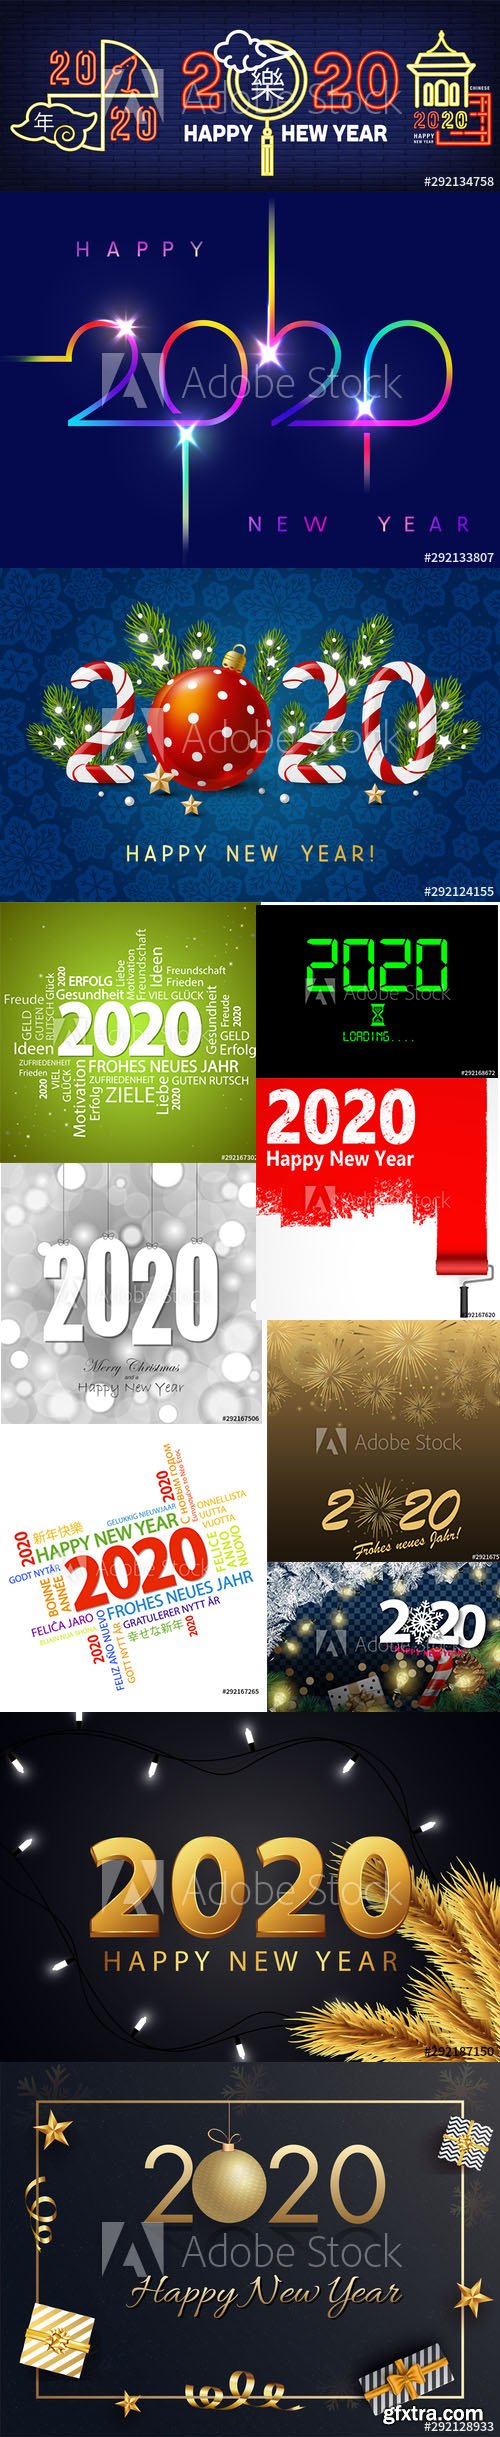 Merry Christmas and Happy New Year 2020 Illustrations Vector Set 5